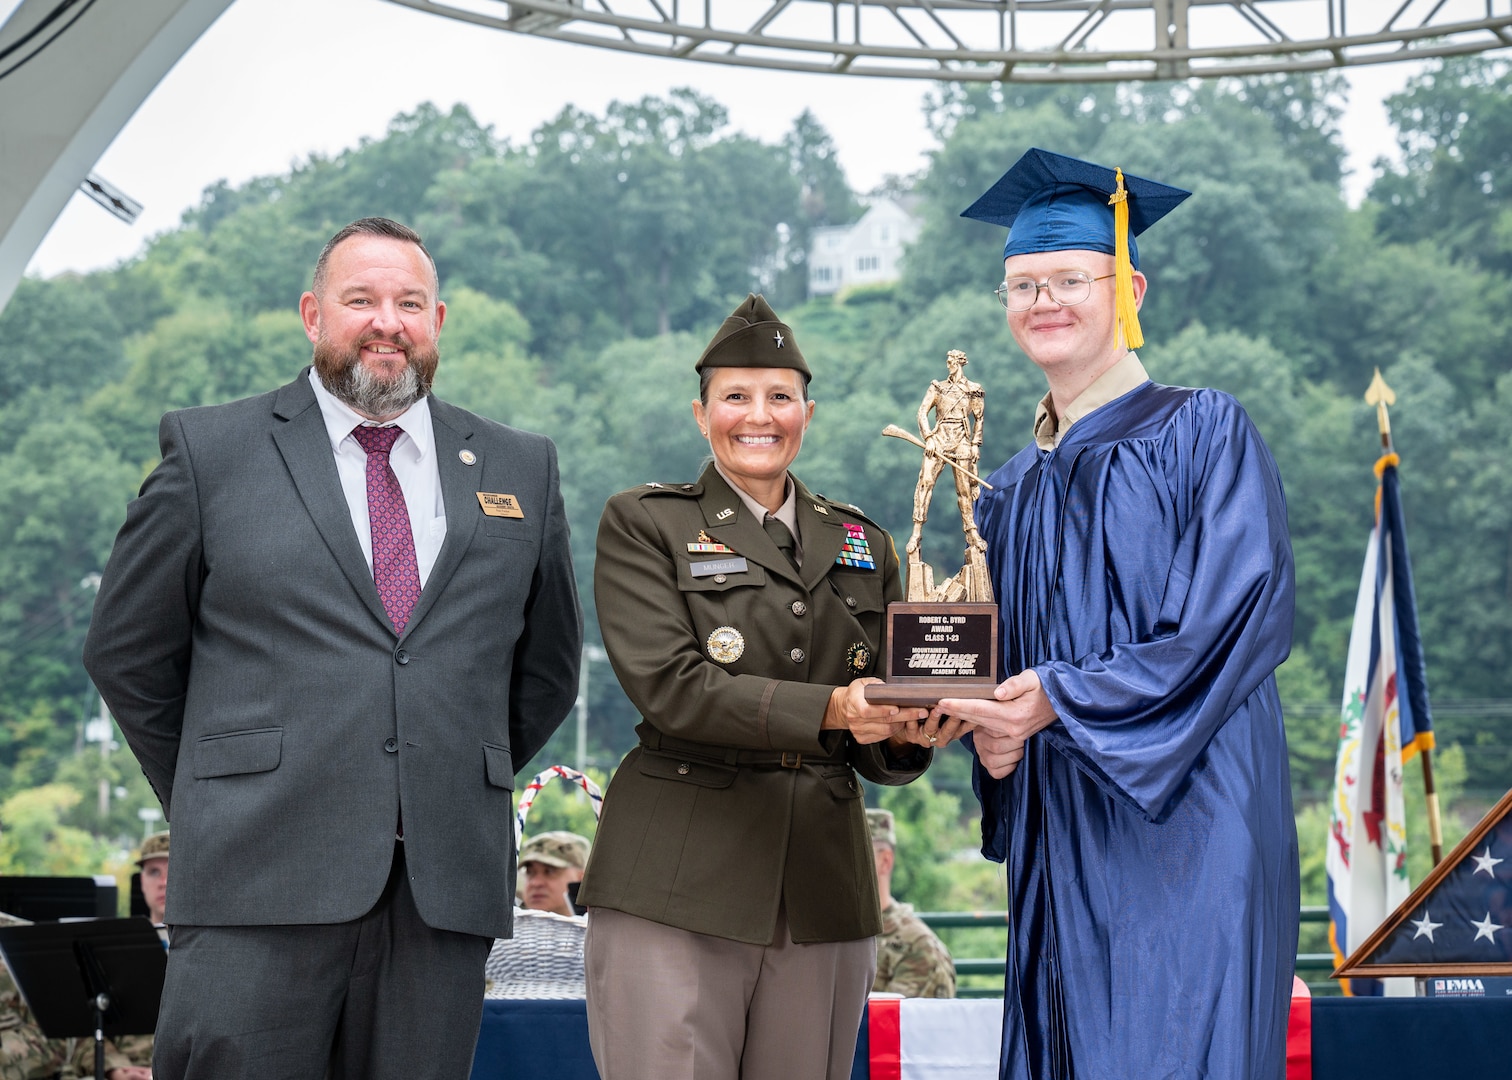 a close-up of three people looking at the camera in a portrait. a white teen (right) is wearing a blue graduation robe and hat. He's holding half of the base if a gold statue of a mountaineer man (about 1 foot tall) that's on a wood base. A woman (center) in U.S. Army green dress uniform is holding the other half. She has dark brown hair in a bun. A man with brown hair and beard is in a grey suit, standing on the left. All three are smiling.